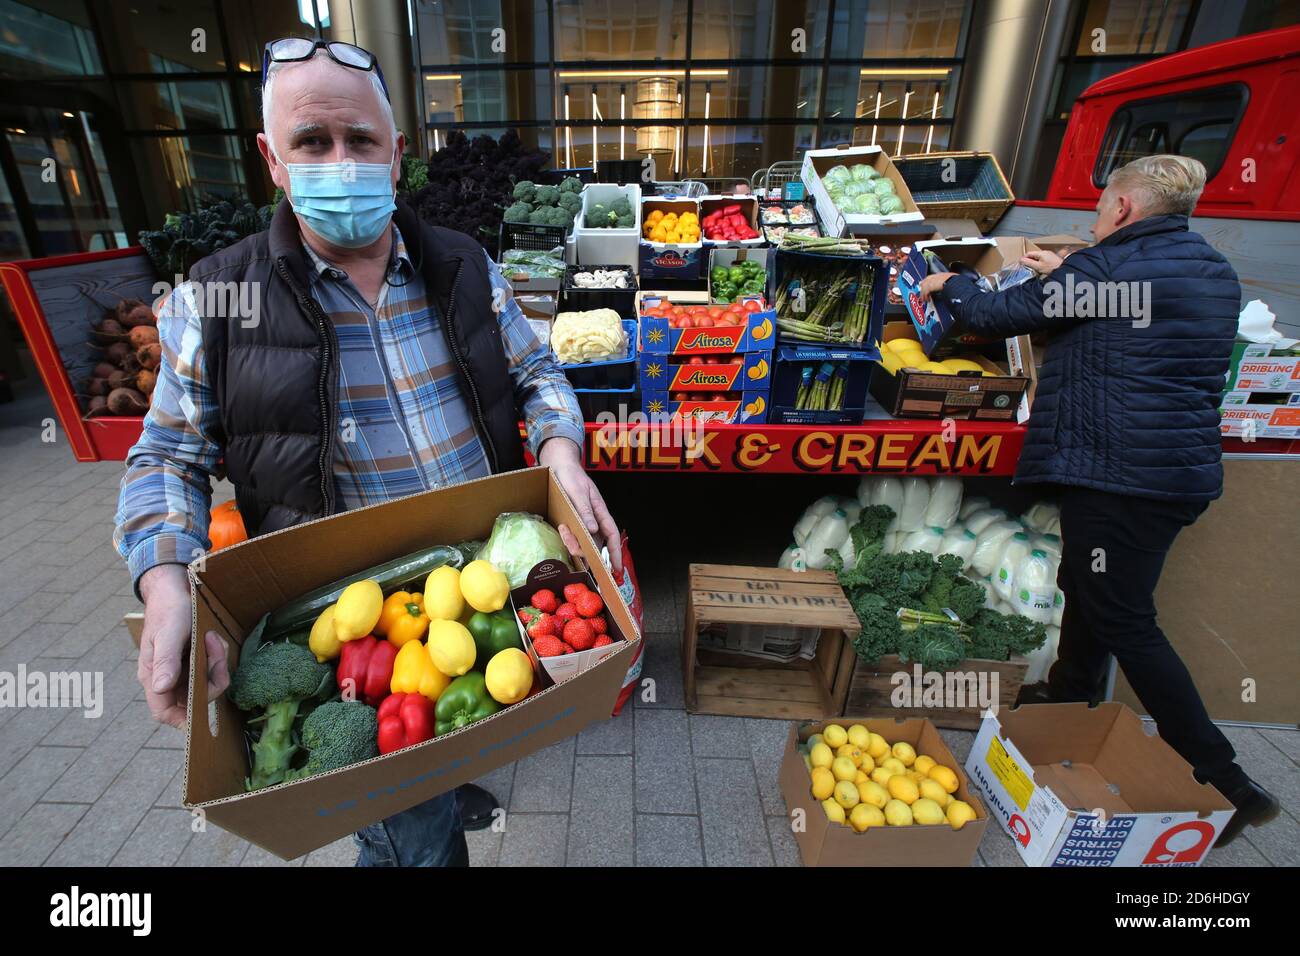 16OCT 2020: BELFAST, CO.ANTRIM: Local pumber Ian Adair buys a box of fresh produce which was being sold either as a donation or below 50% of normal price outside a Belfast Hotel as Northern Ireland prepares to lock down as from 18:00 BST on Friday as Northern Ireland is put under stricter Covid-19 restrictions.On Thursday the Finance Minister Conor Murphy announced hotels will be able to apply to a scheme designed to help businesses forced to shut. The additional financial support comes after new restrictions were announced in a bid to stem cases of Covid-19. Photo/Paul McErlane Stock Photo